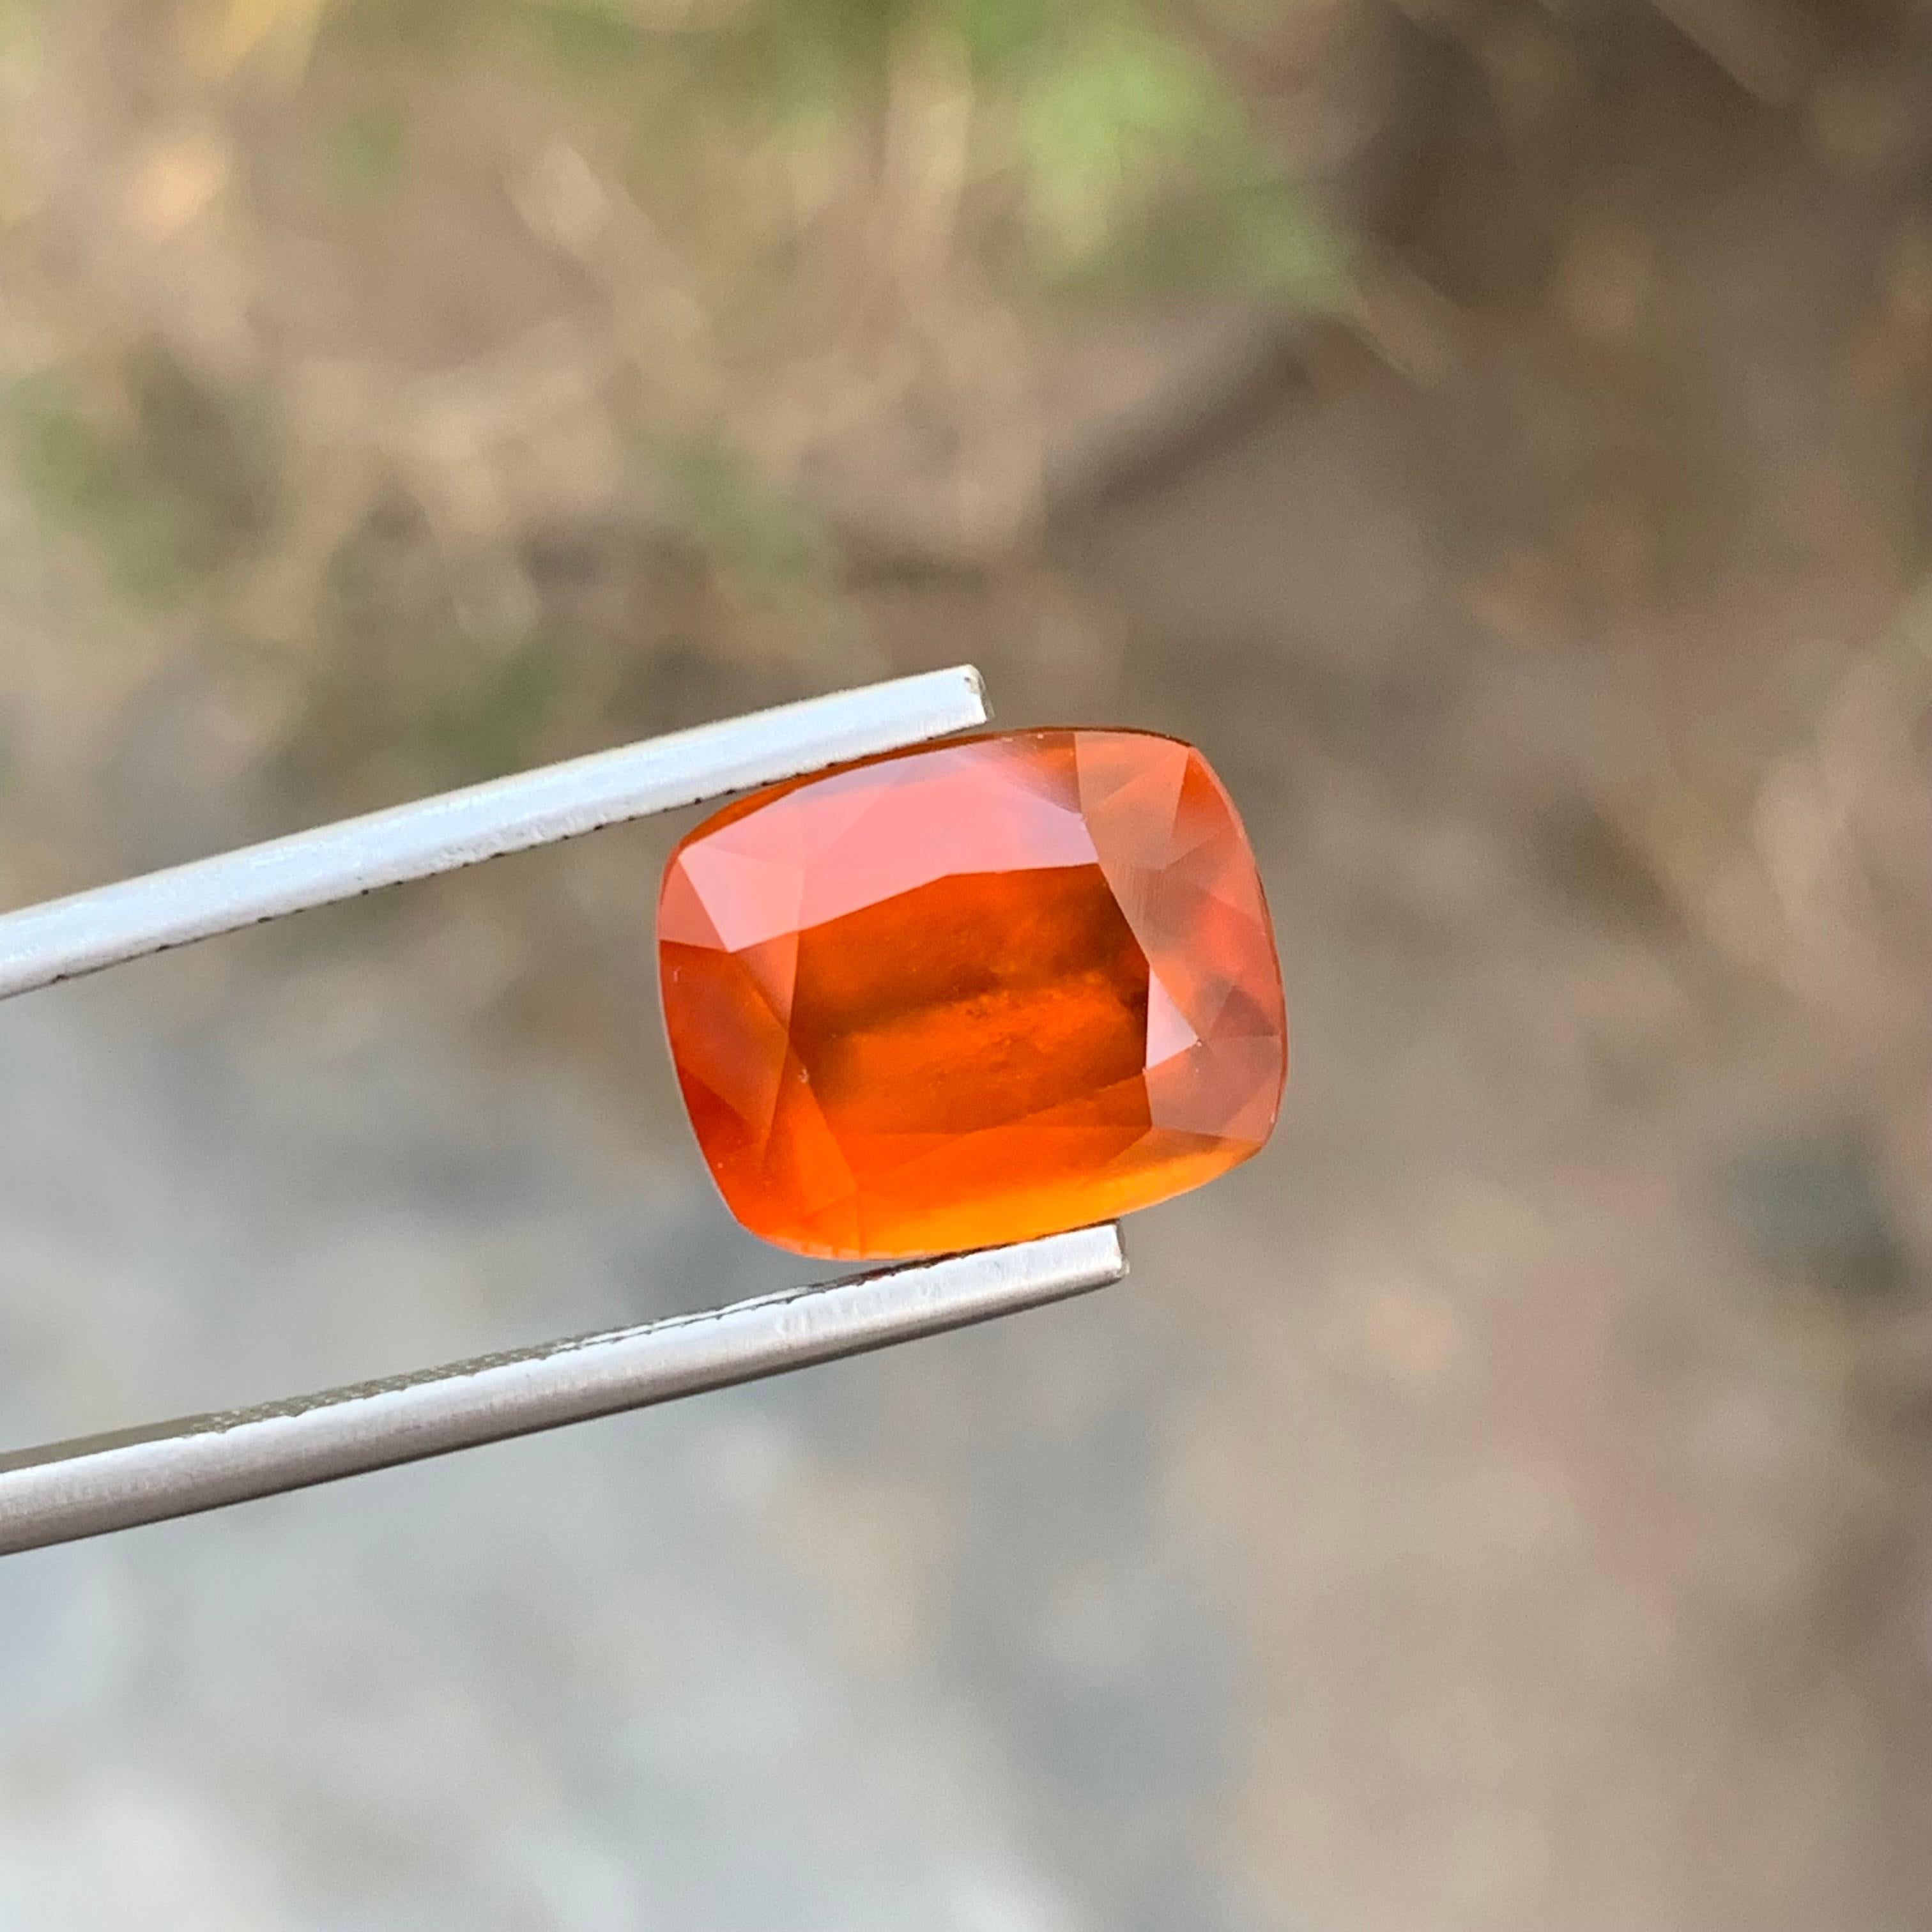 Loose Hessonite Garnet
Weight: 9.70 Carats
Dimension: 13.1 x 10.8 x 7.3 Mm
Colour: Smoky Orange
Cut: Cushion 
Certificate: On Demand

Hessonite garnet, also known as cinnamon stone or gomedh, is a captivating gemstone renowned for its warm hues and